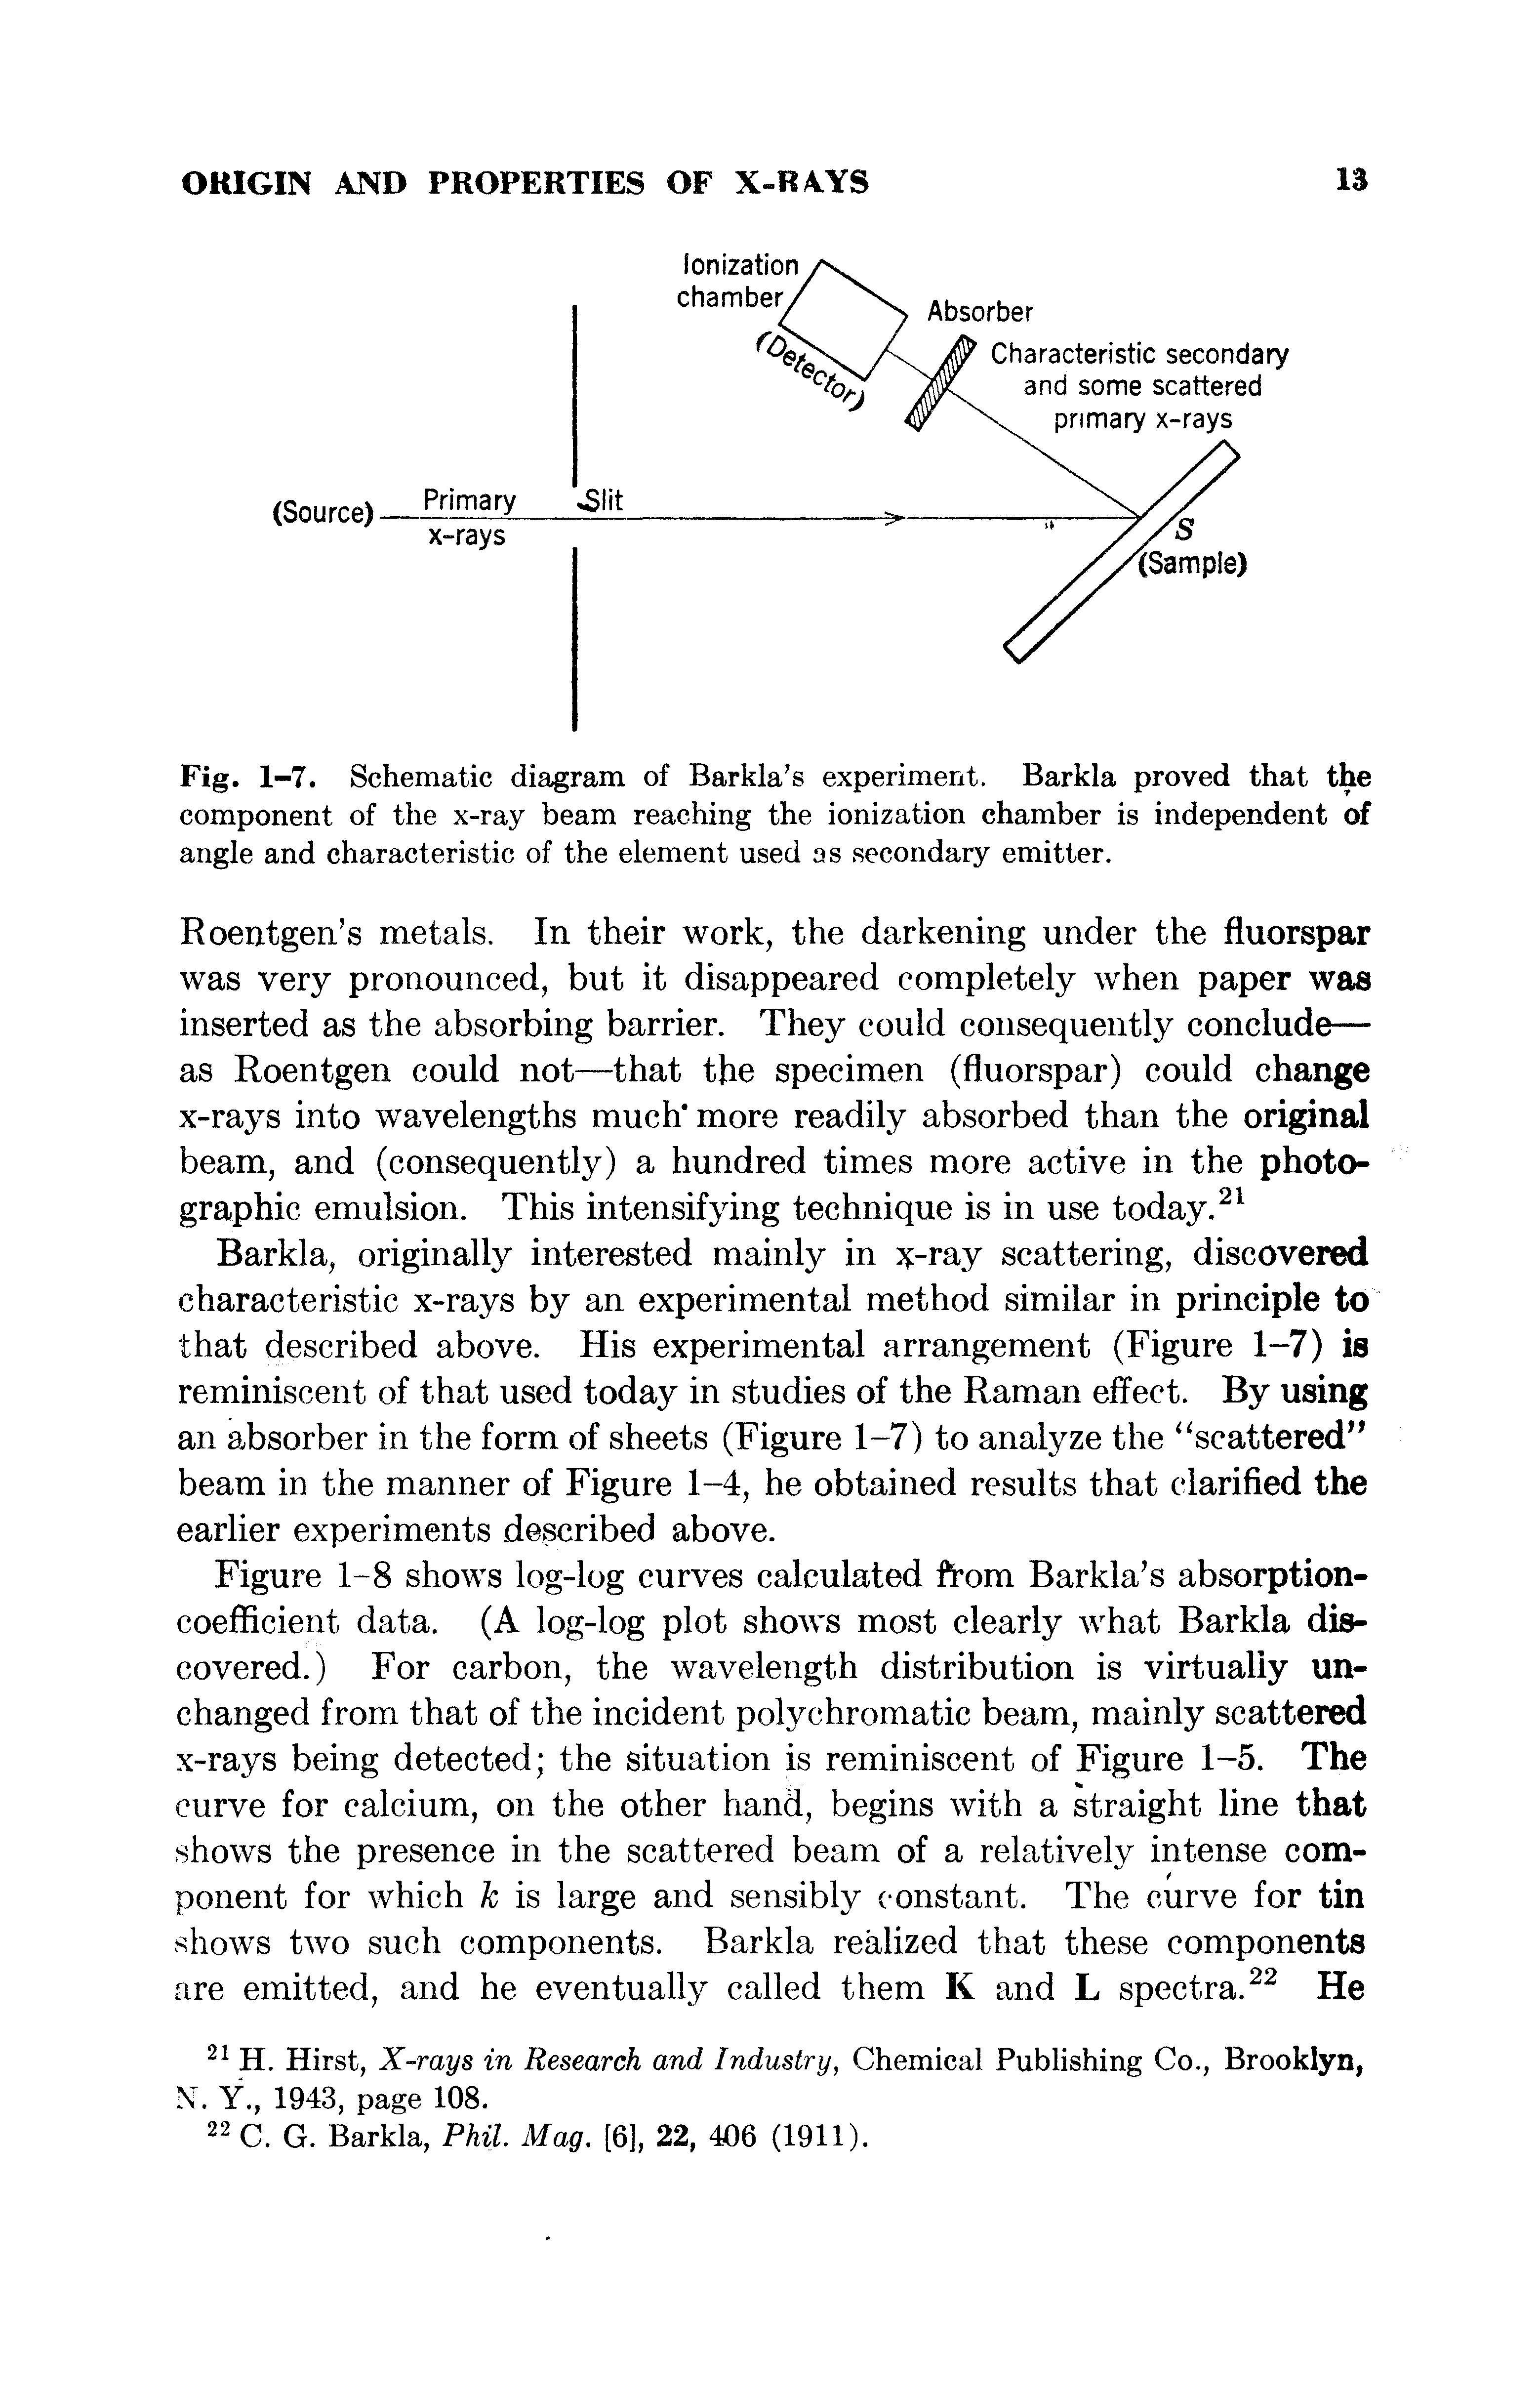 Fig. 1-7. Schematic diagram of Barkla s experiment. Barkla proved that the component of the x-ray beam reaching the ionization chamber is independent of angle and characteristic of the element used as secondary emitter.